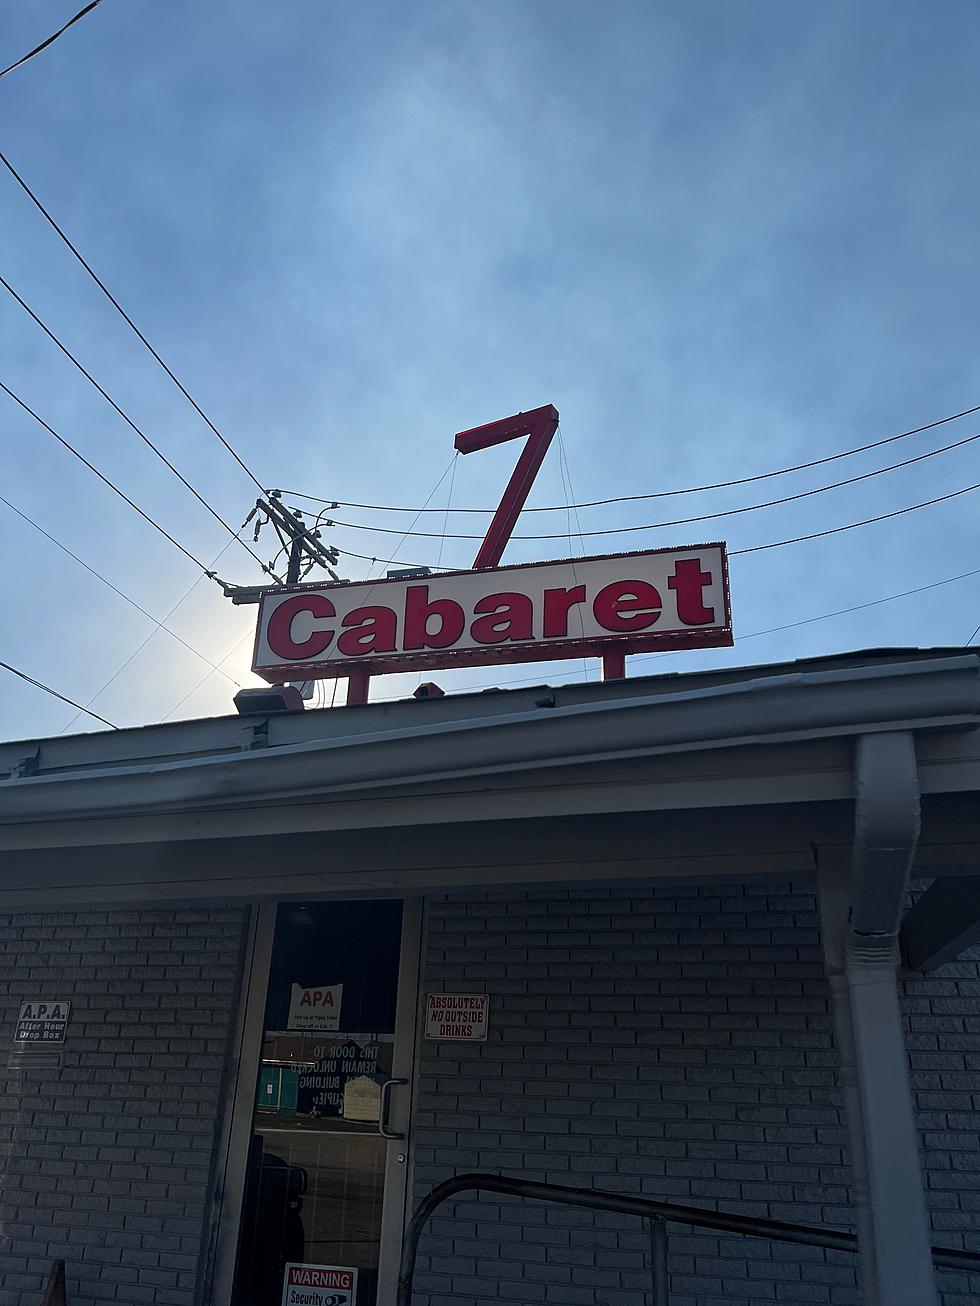 Cab 7 in Killeen, Texas Has A Long, Interesting History